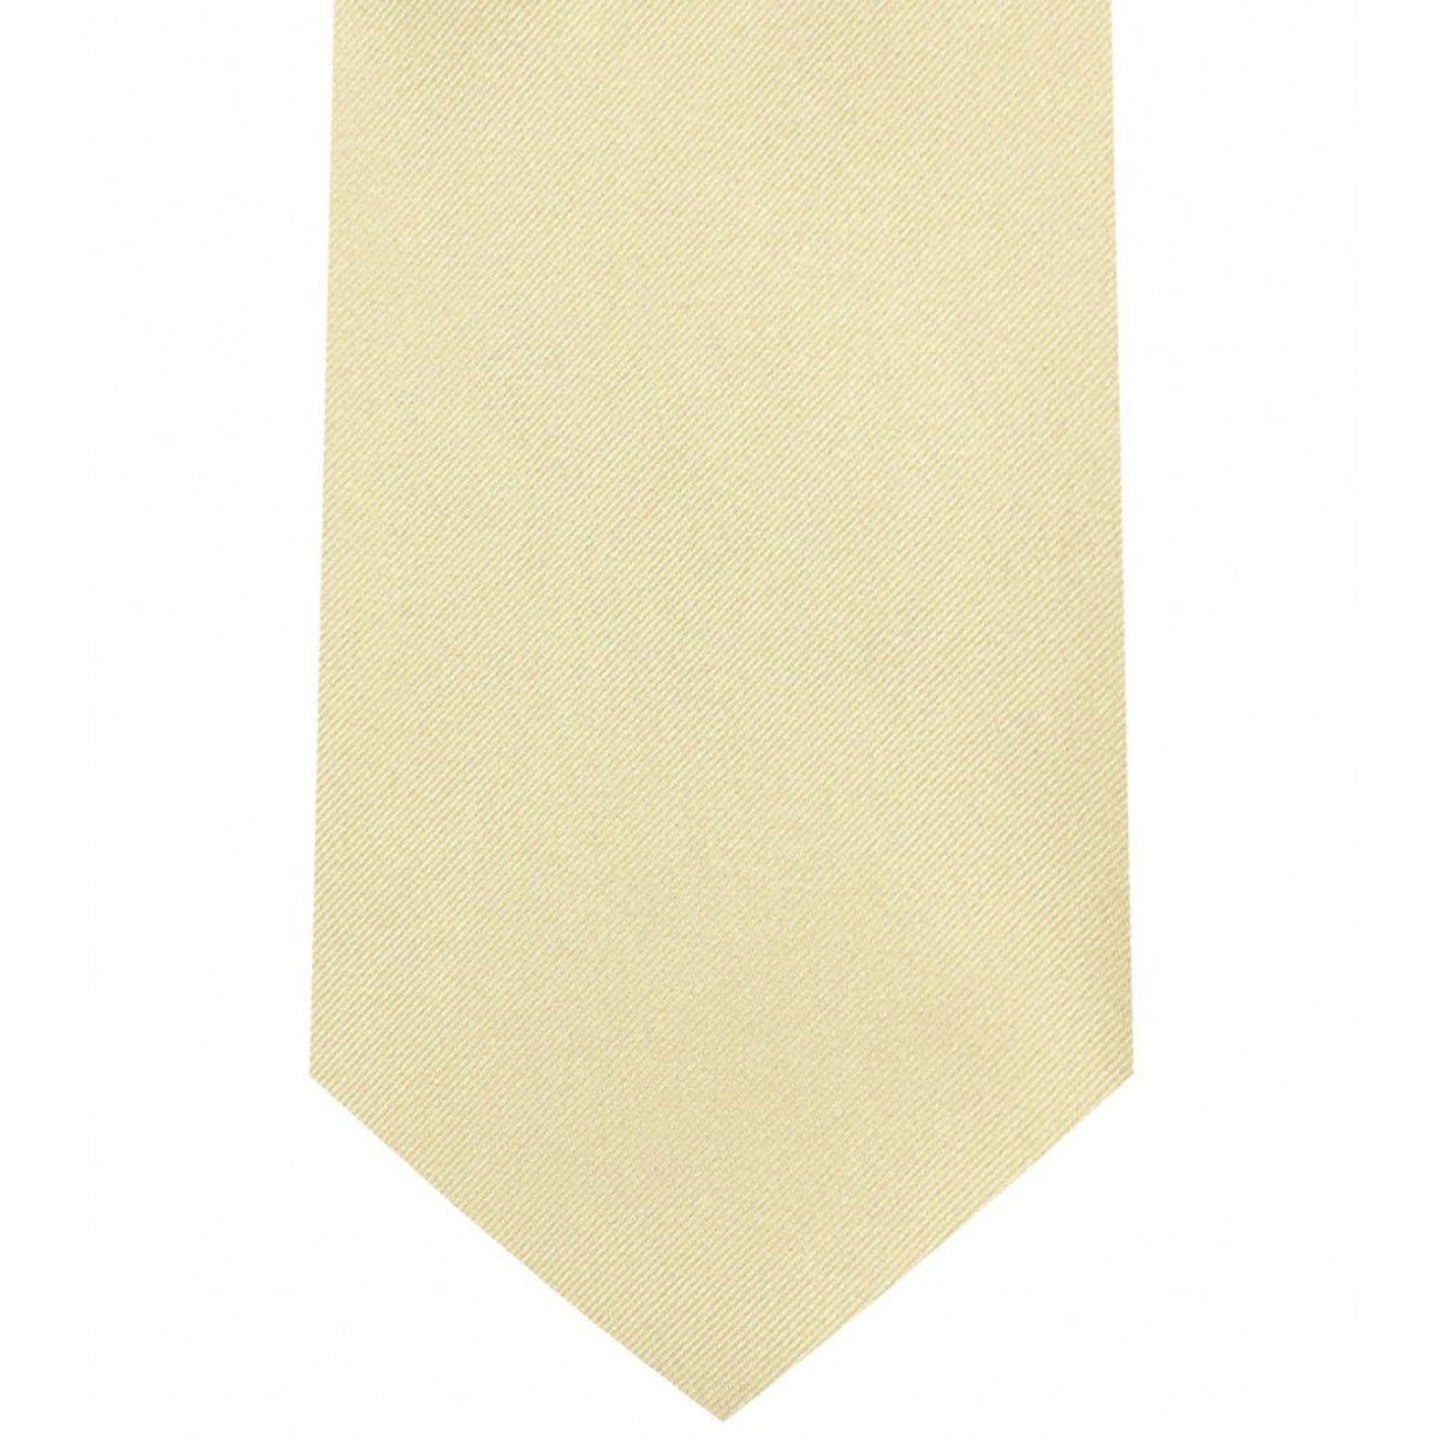 Classic Champagne Tie Regular width 3.5 inches With Matching Pocket Square | KCT Menswear 